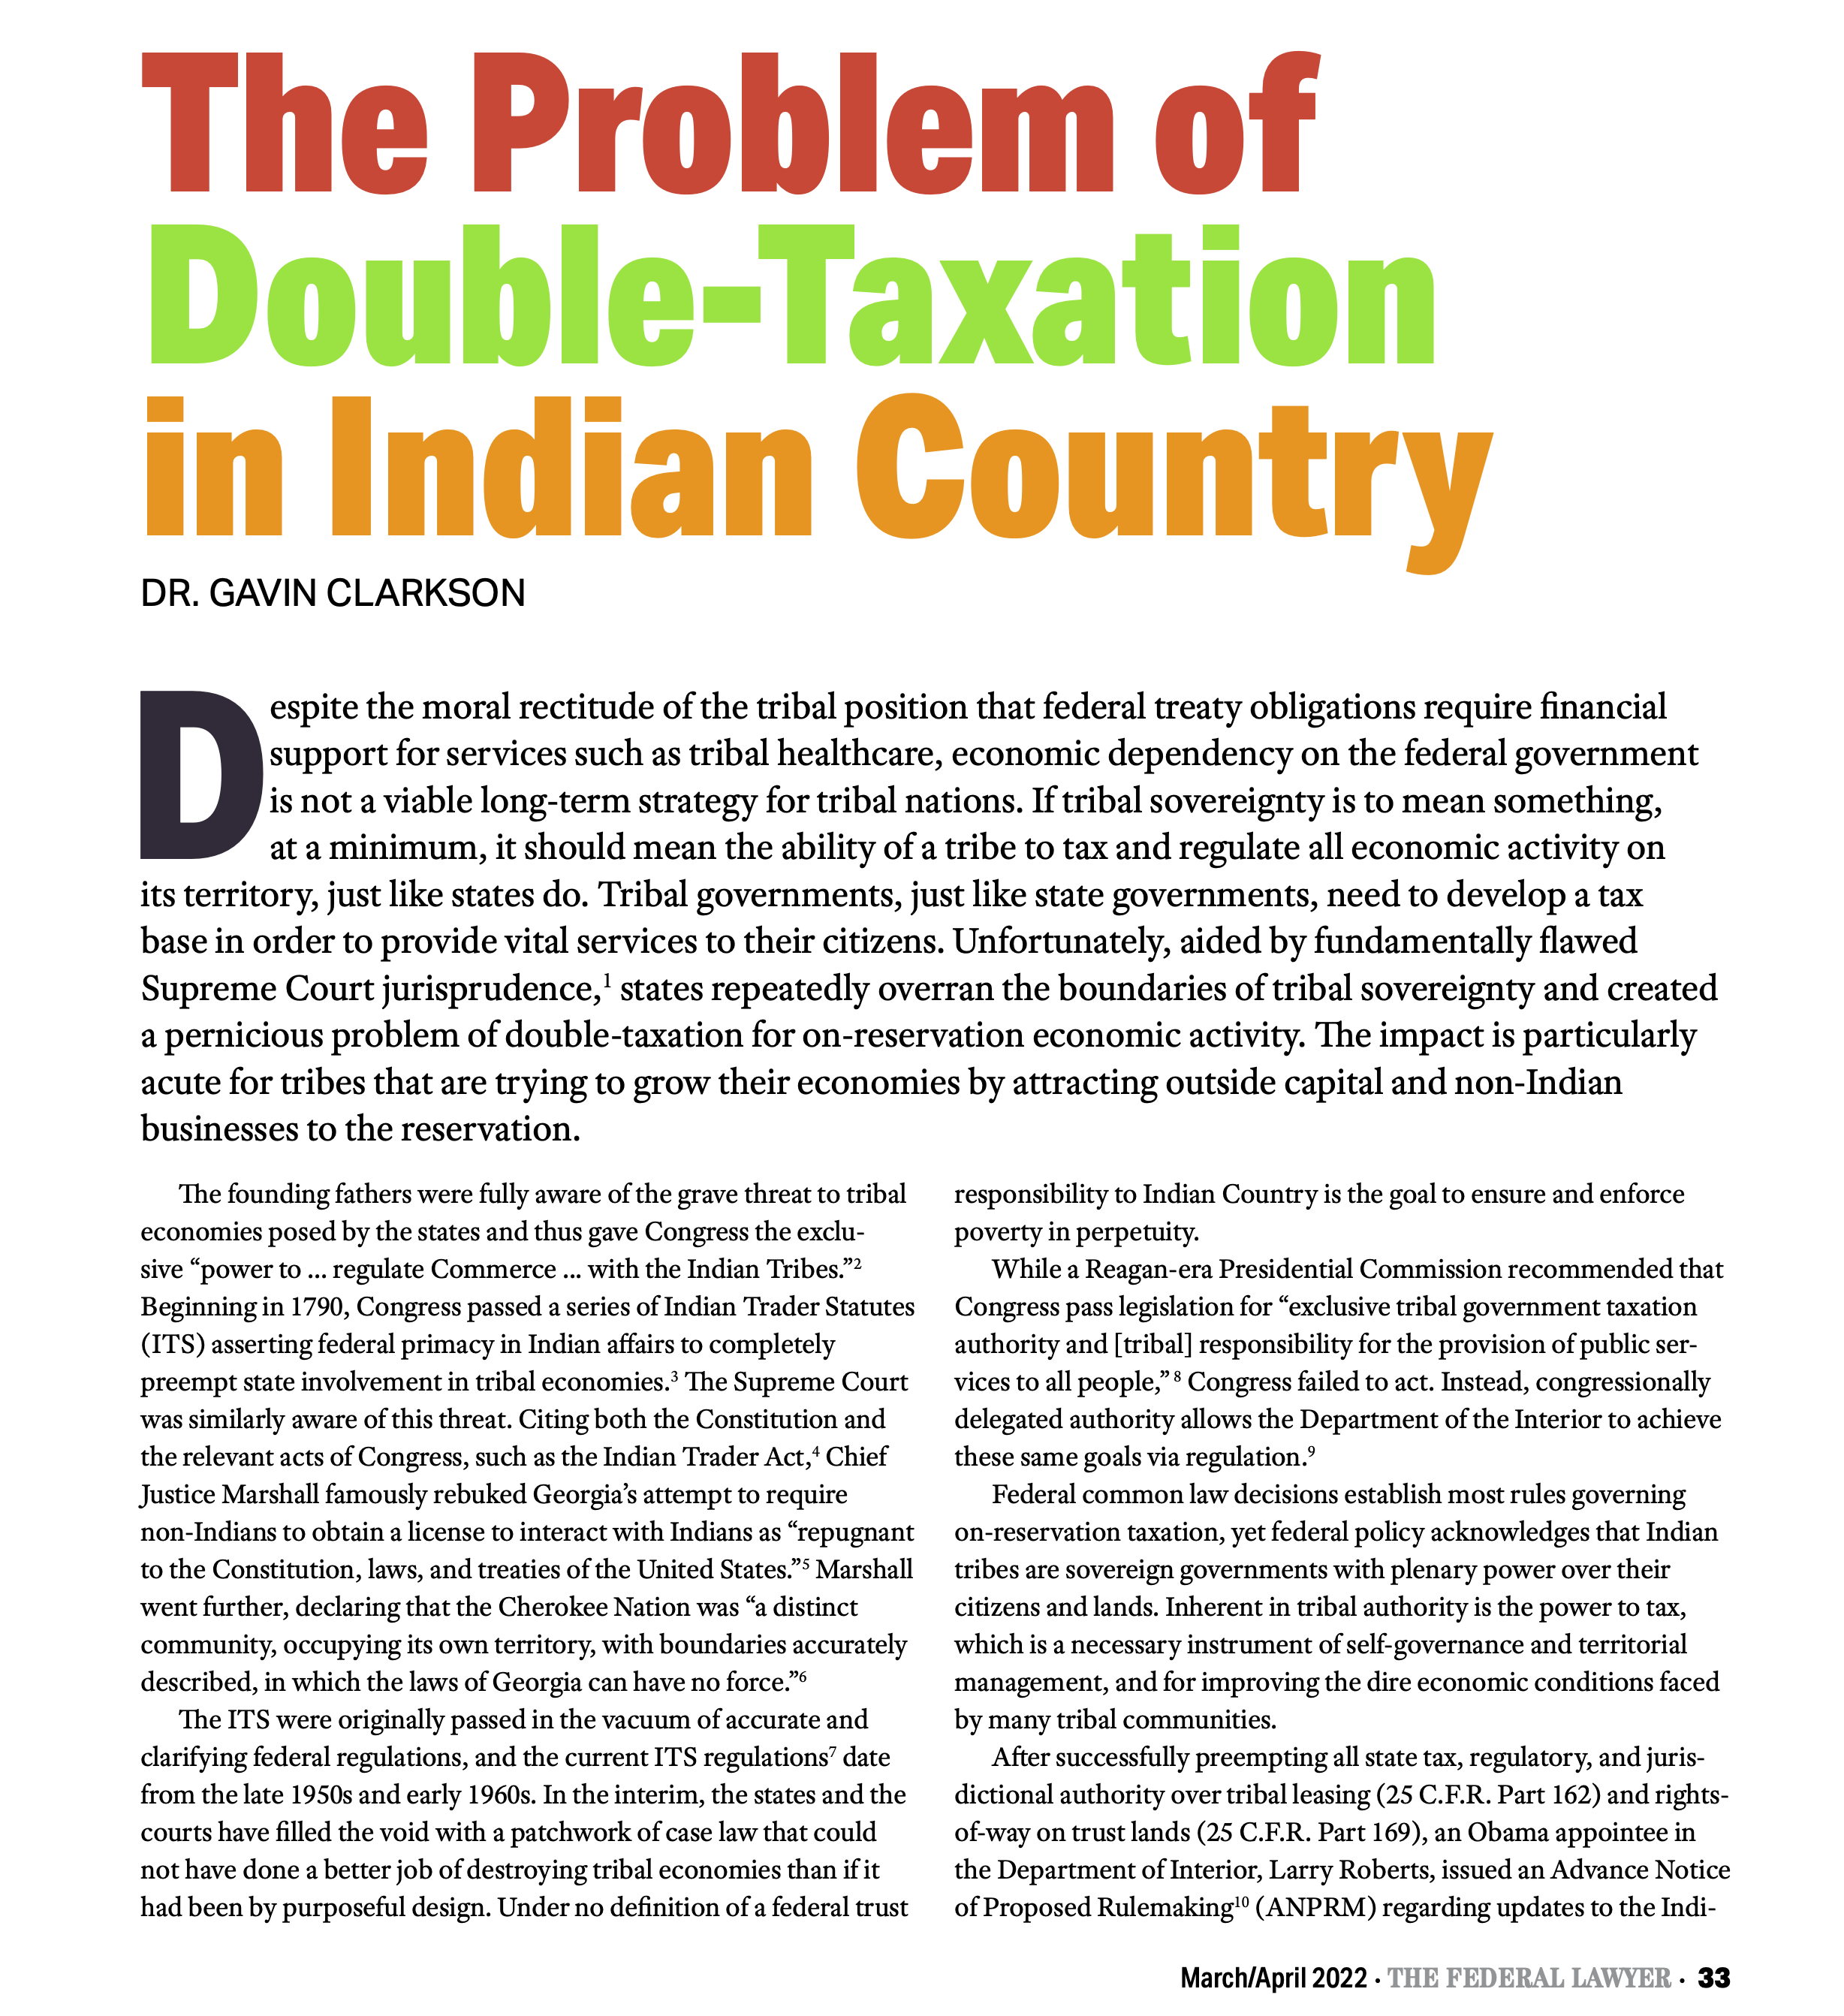 The problem of double taxation in Indian country